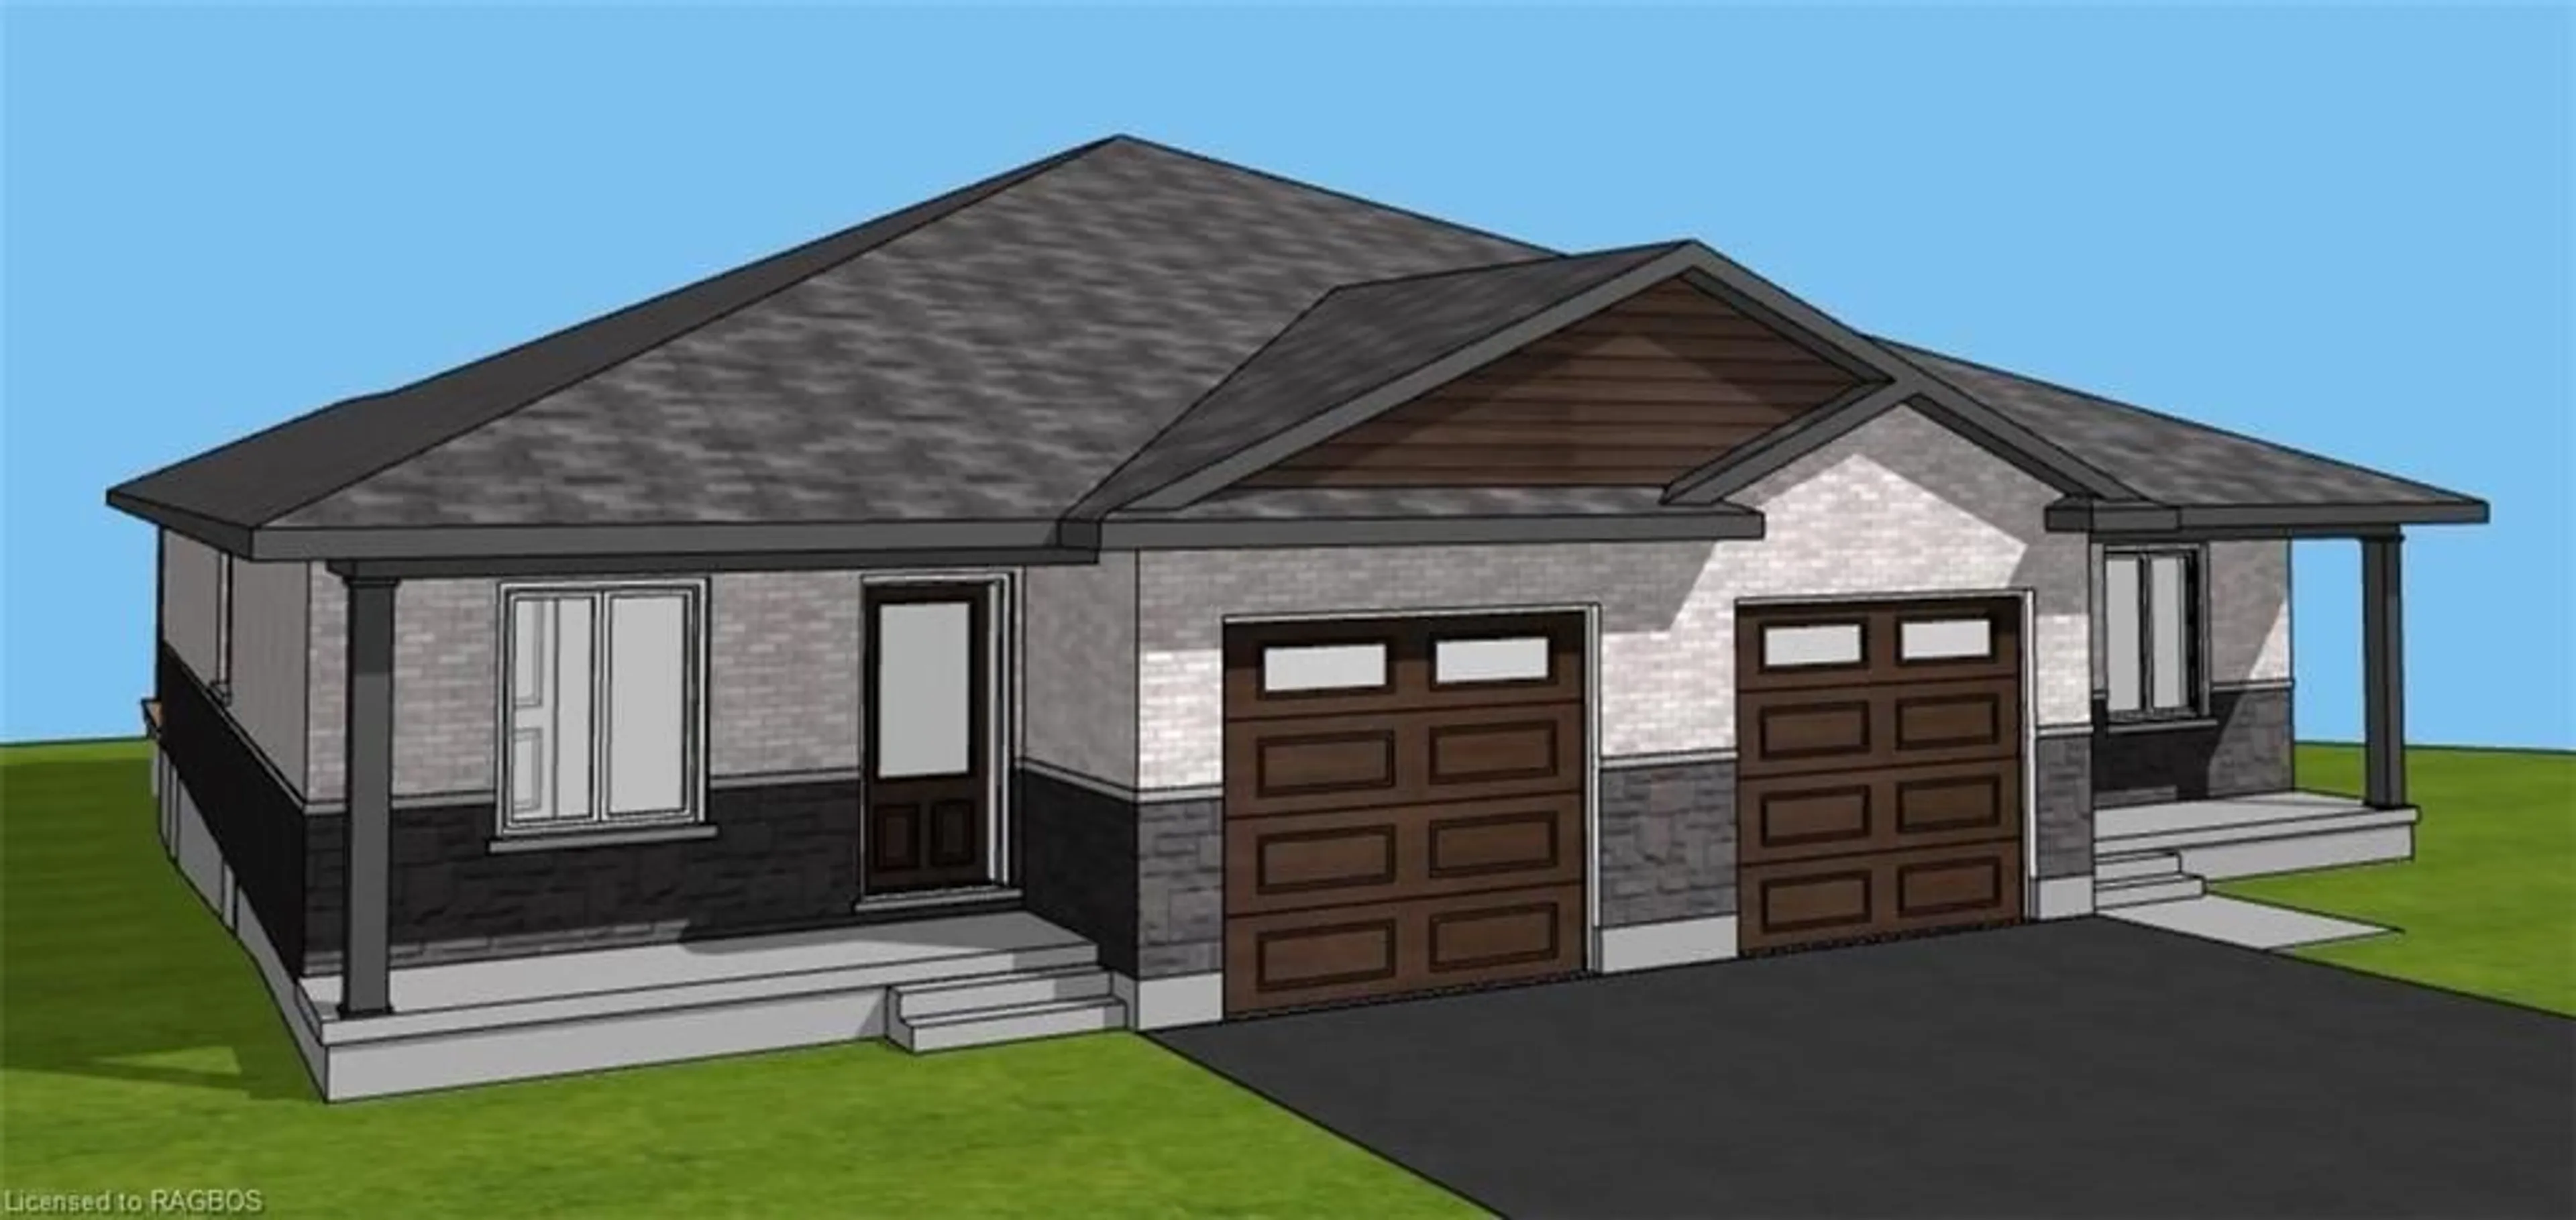 Frontside or backside of a home for 217 Elgin St, Palmerston Ontario N0G 2P0